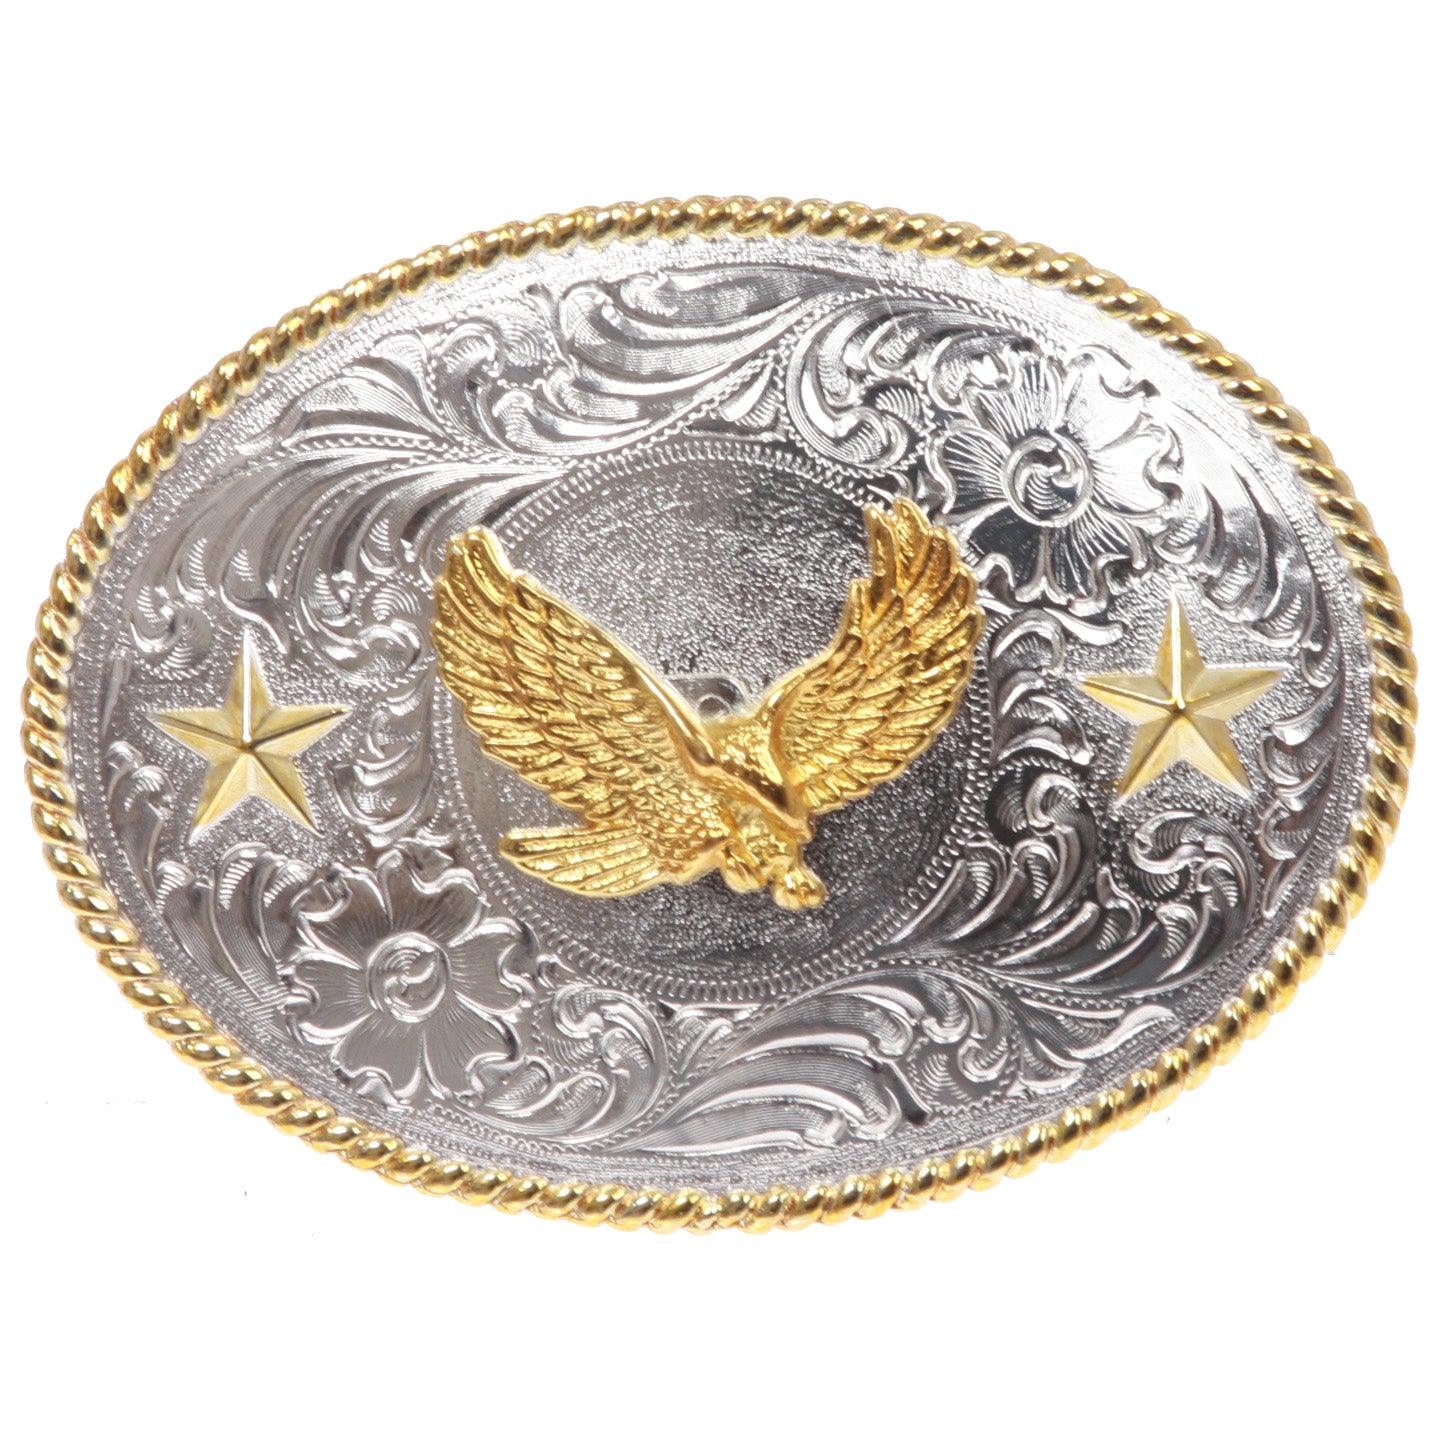 Western Cowboy Silver Buckle with Gold Soaring Eagle